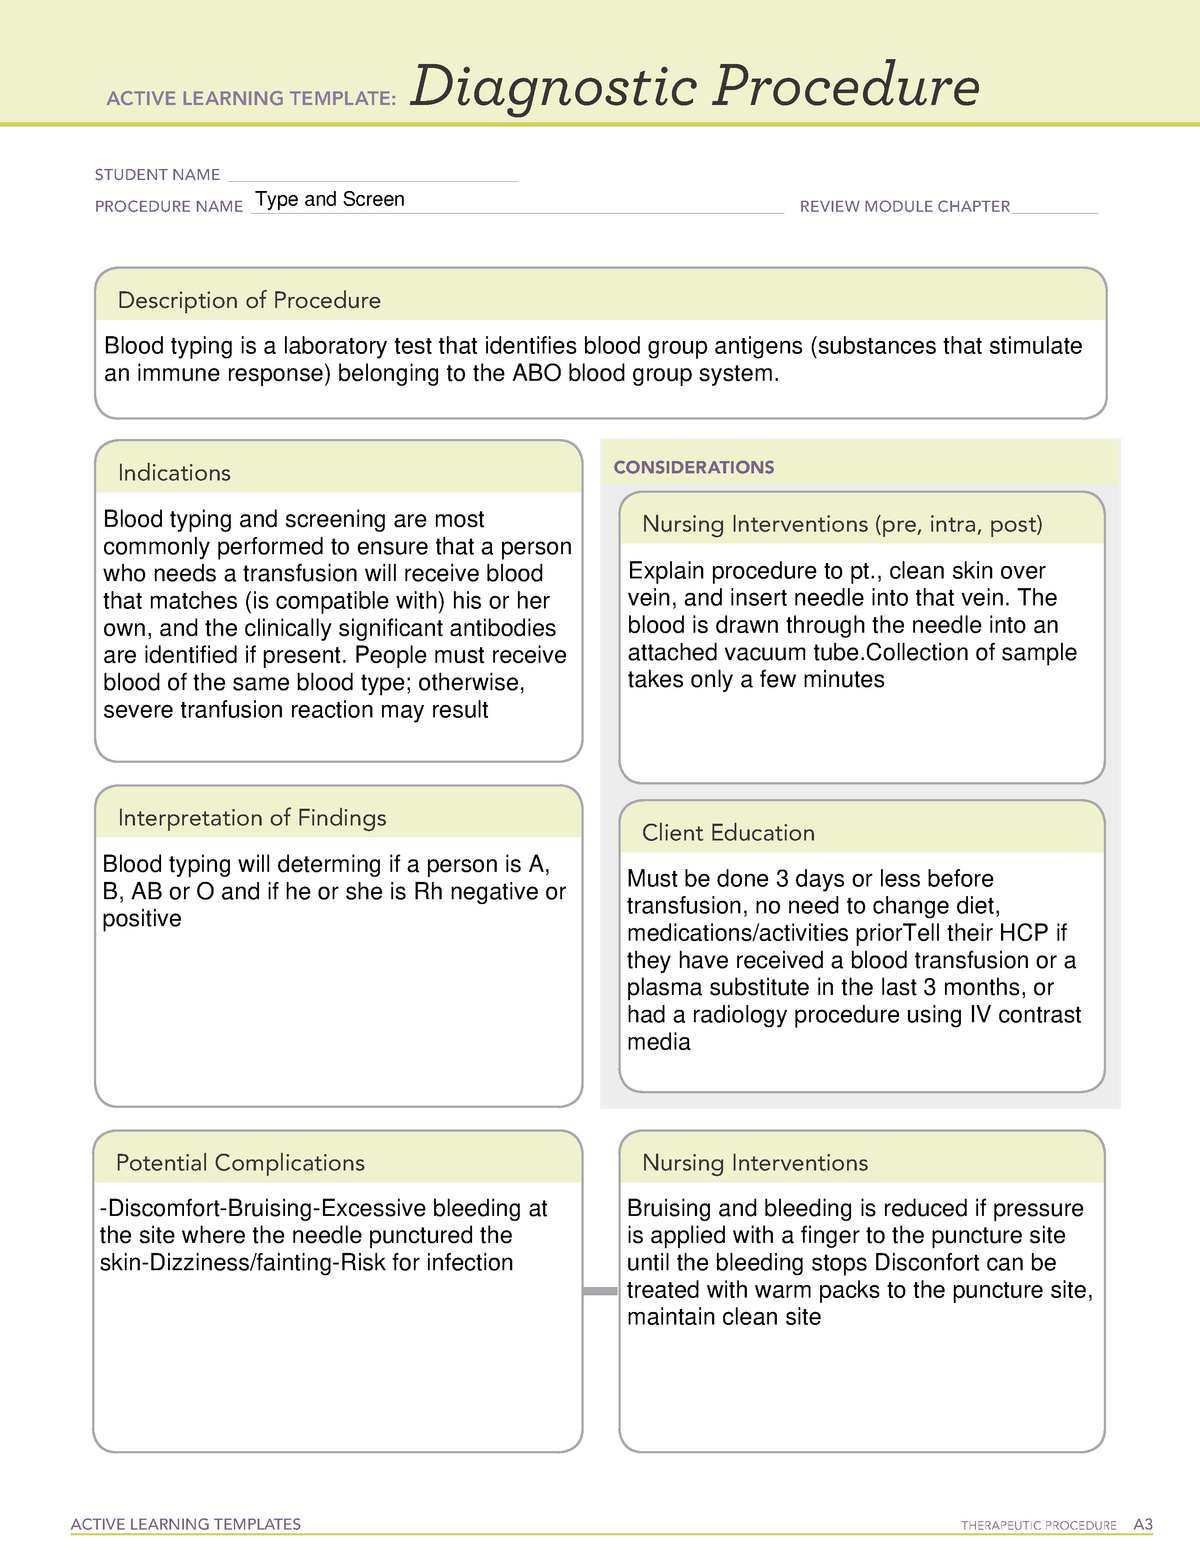 ATI Type and Screen Diagnostic Procedure Sheet ACTIVE LEARNING